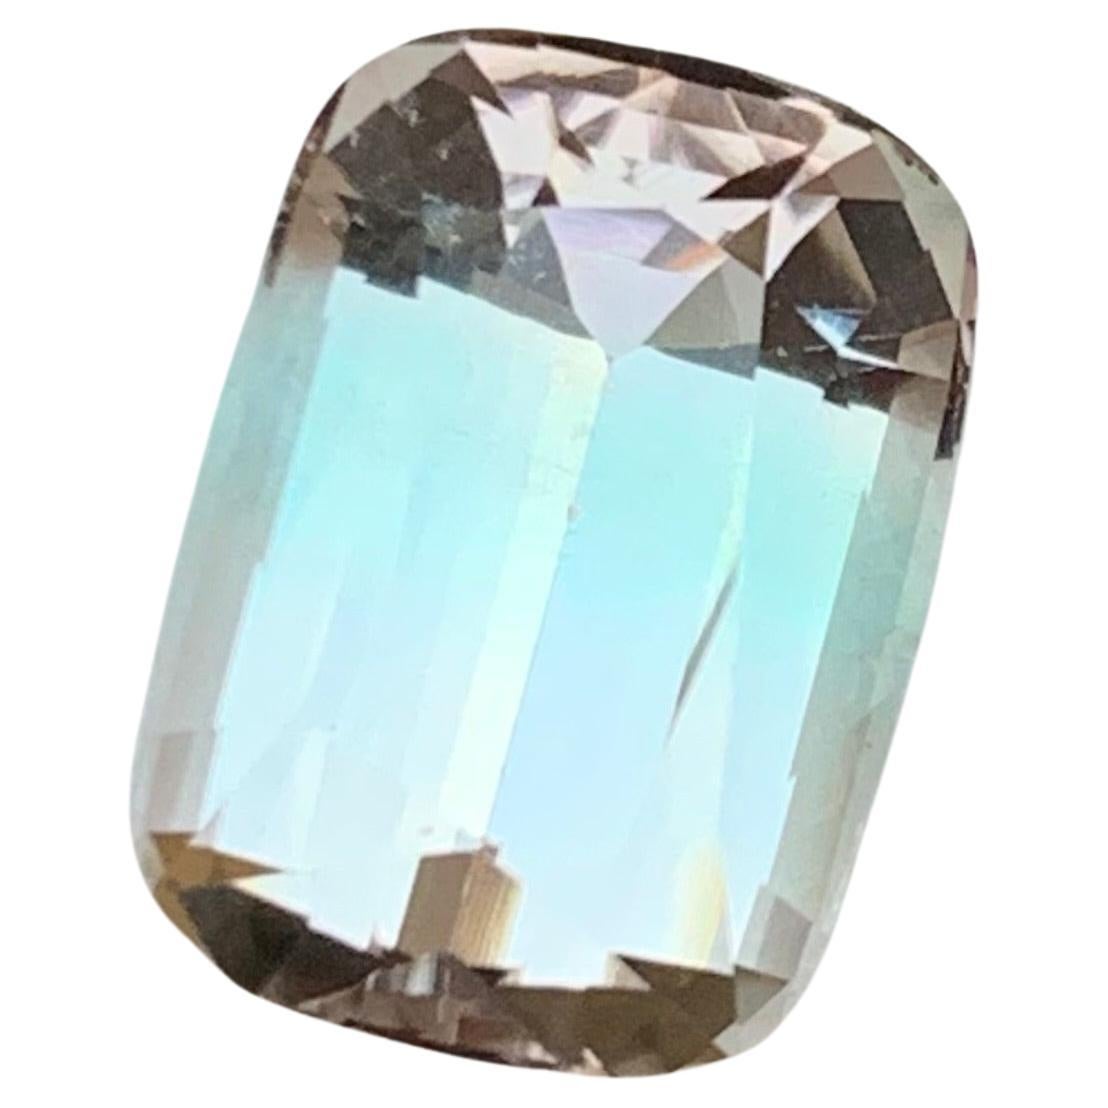 Rare Bicolor Natural Tourmaline Gemstone, 7.60 Ct Step Cushion for Ring/Pendant For Sale